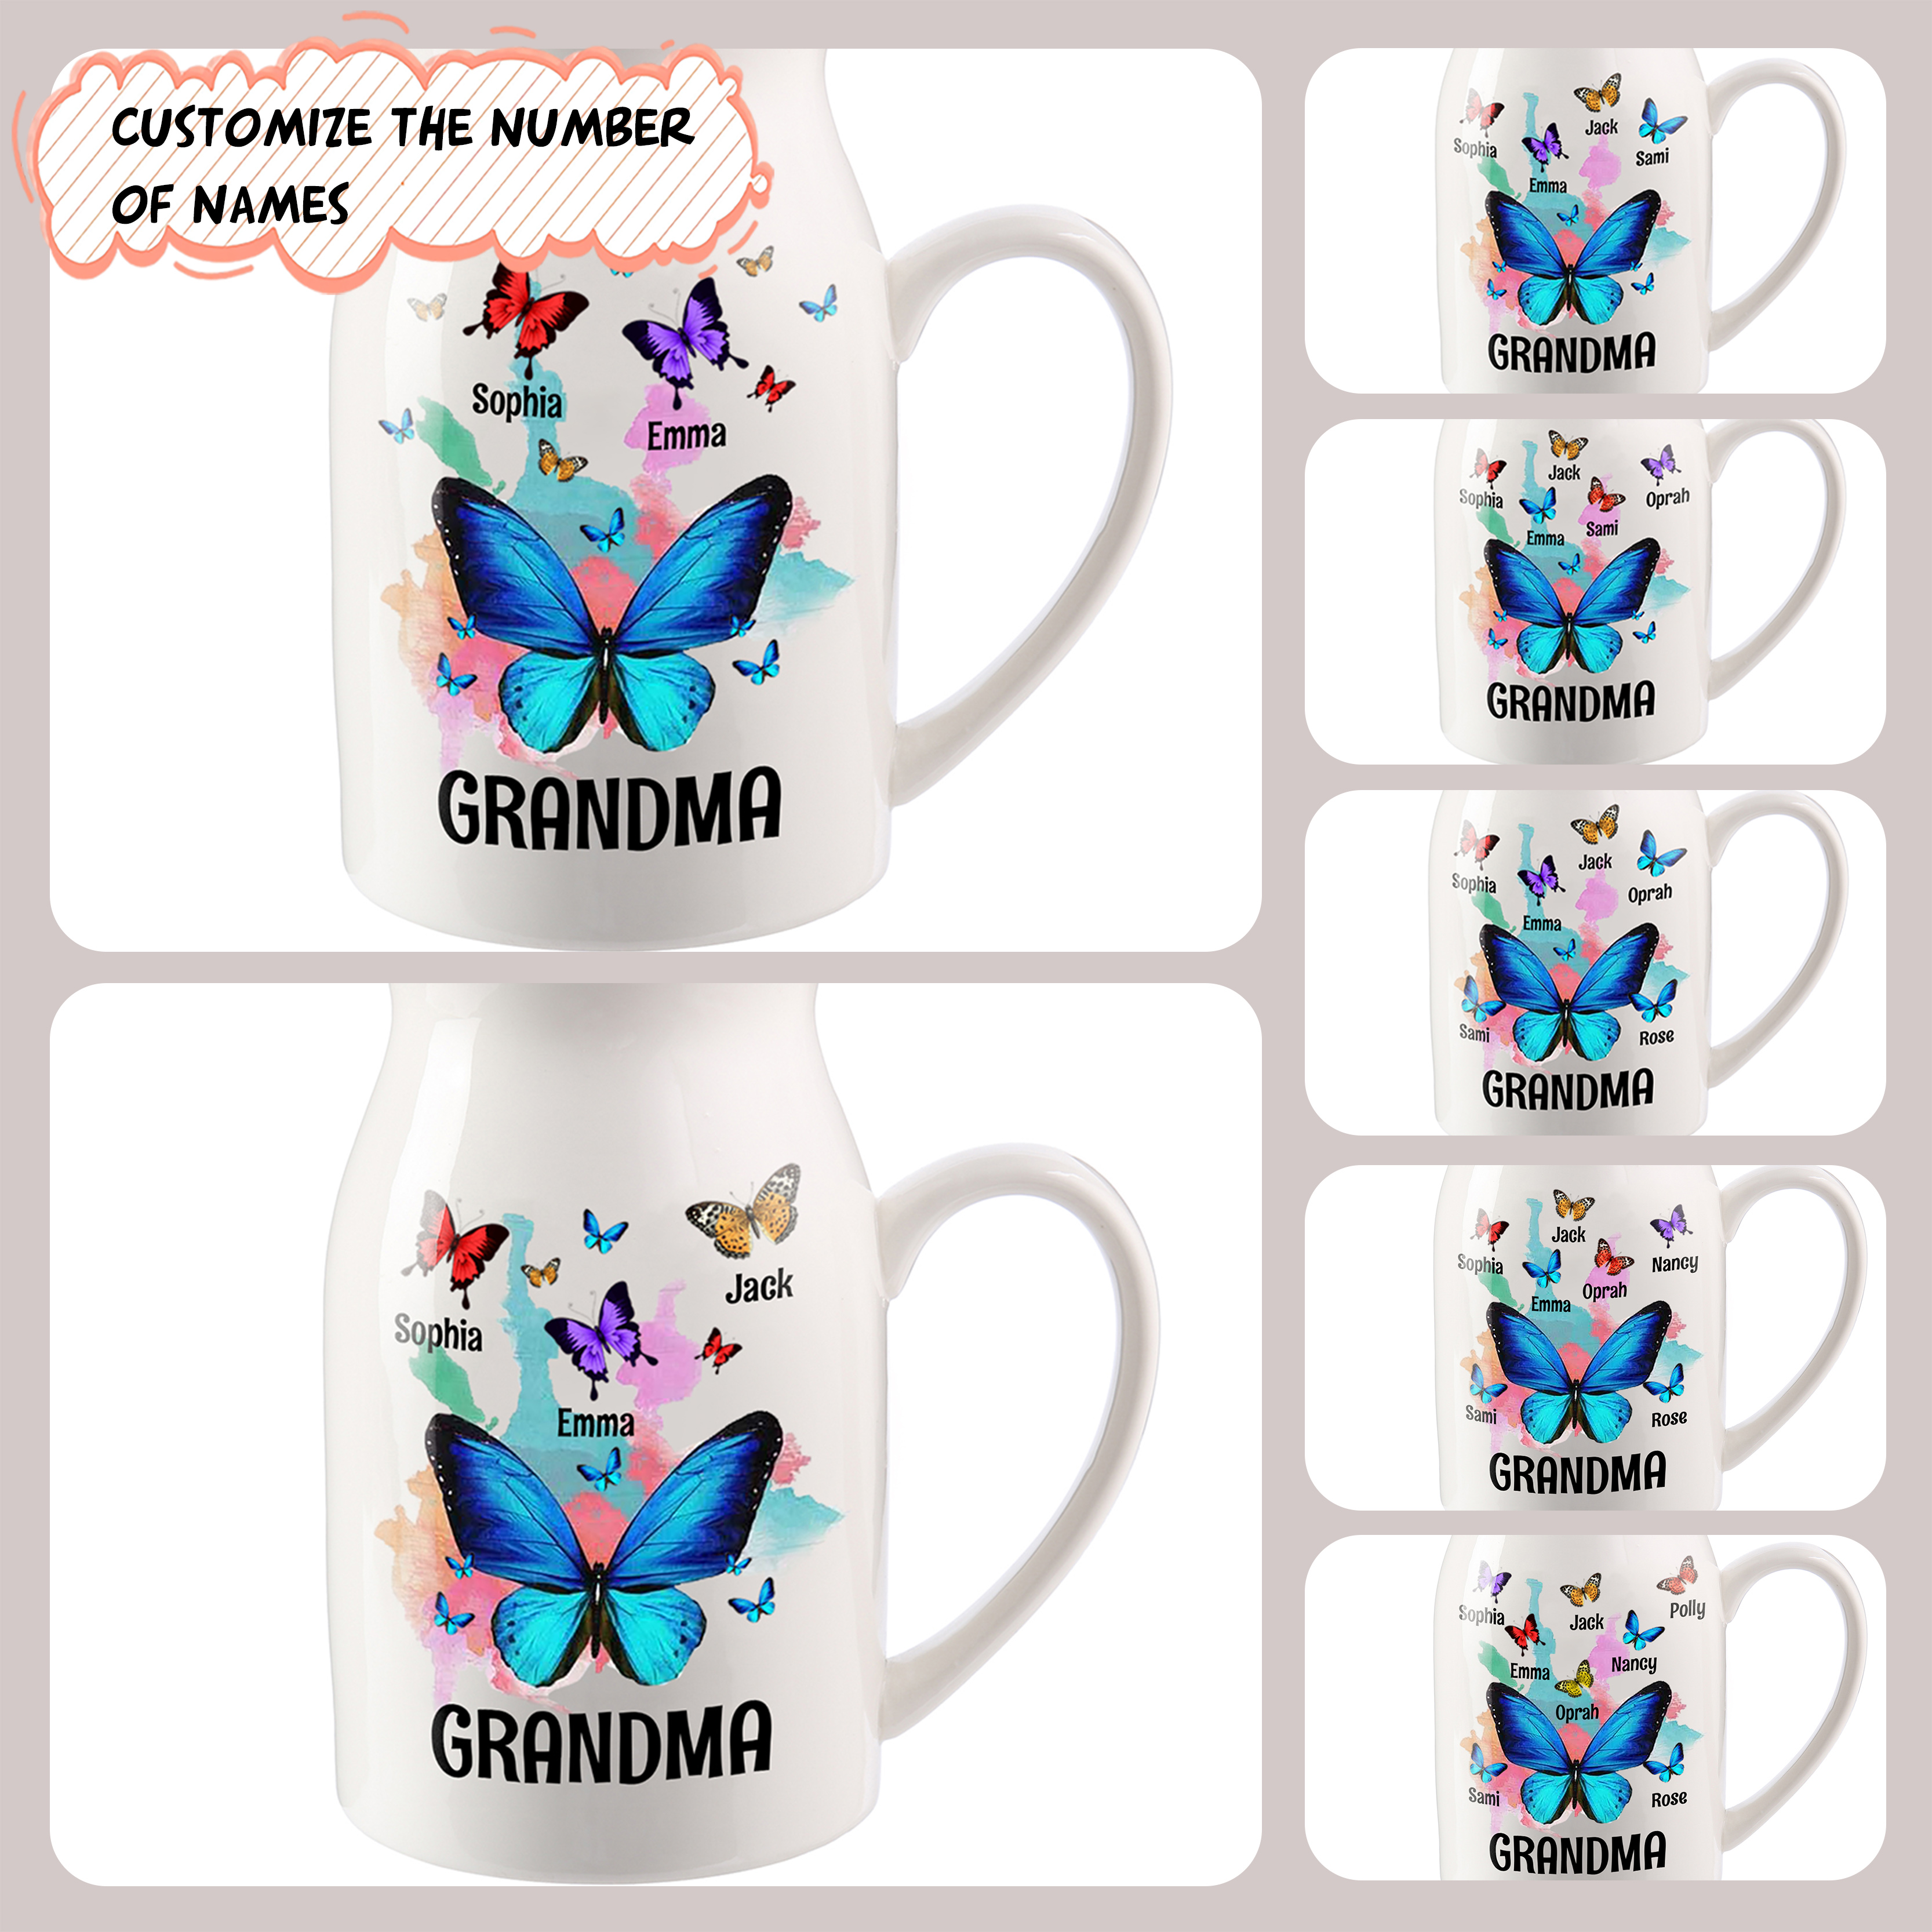 3 Names - Personalized Beautiful Colorful Butterfly Style Ceramic Vase with Customizable Names As a Wonderful Gift For Grandma